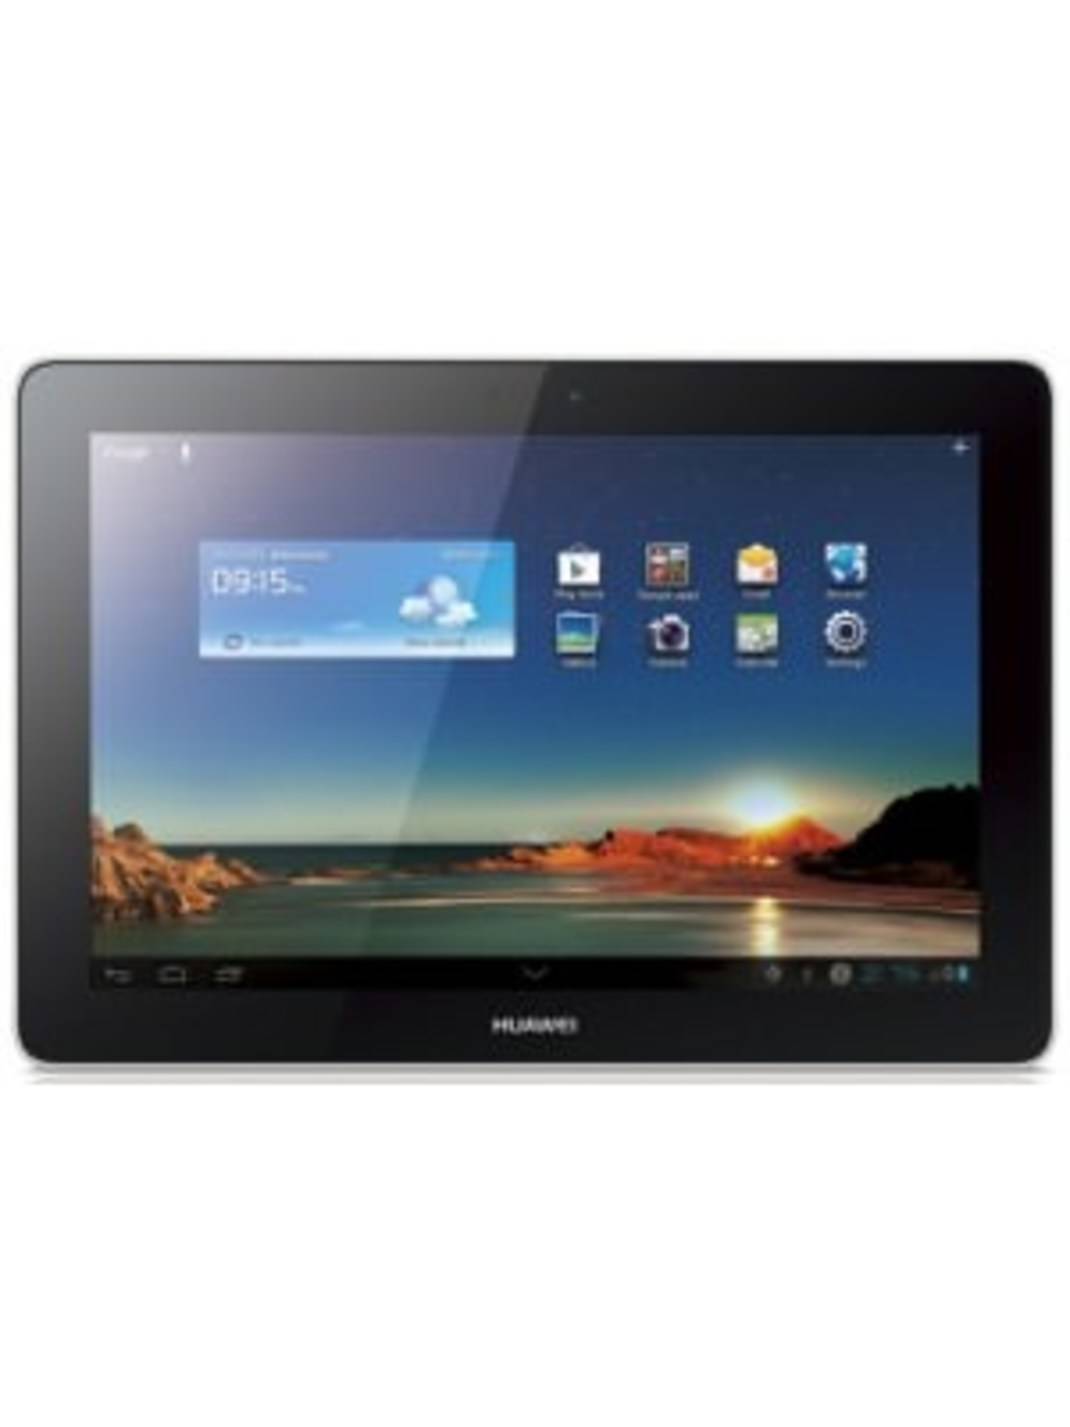 Compare Huawei MediaPad 10 Link vs Huawei MediaPad M5 Lite - Huawei MediaPad Link vs Huawei MediaPad M5 Lite Comparison by Price, Specifications, &amp; Features | Gadgets Now